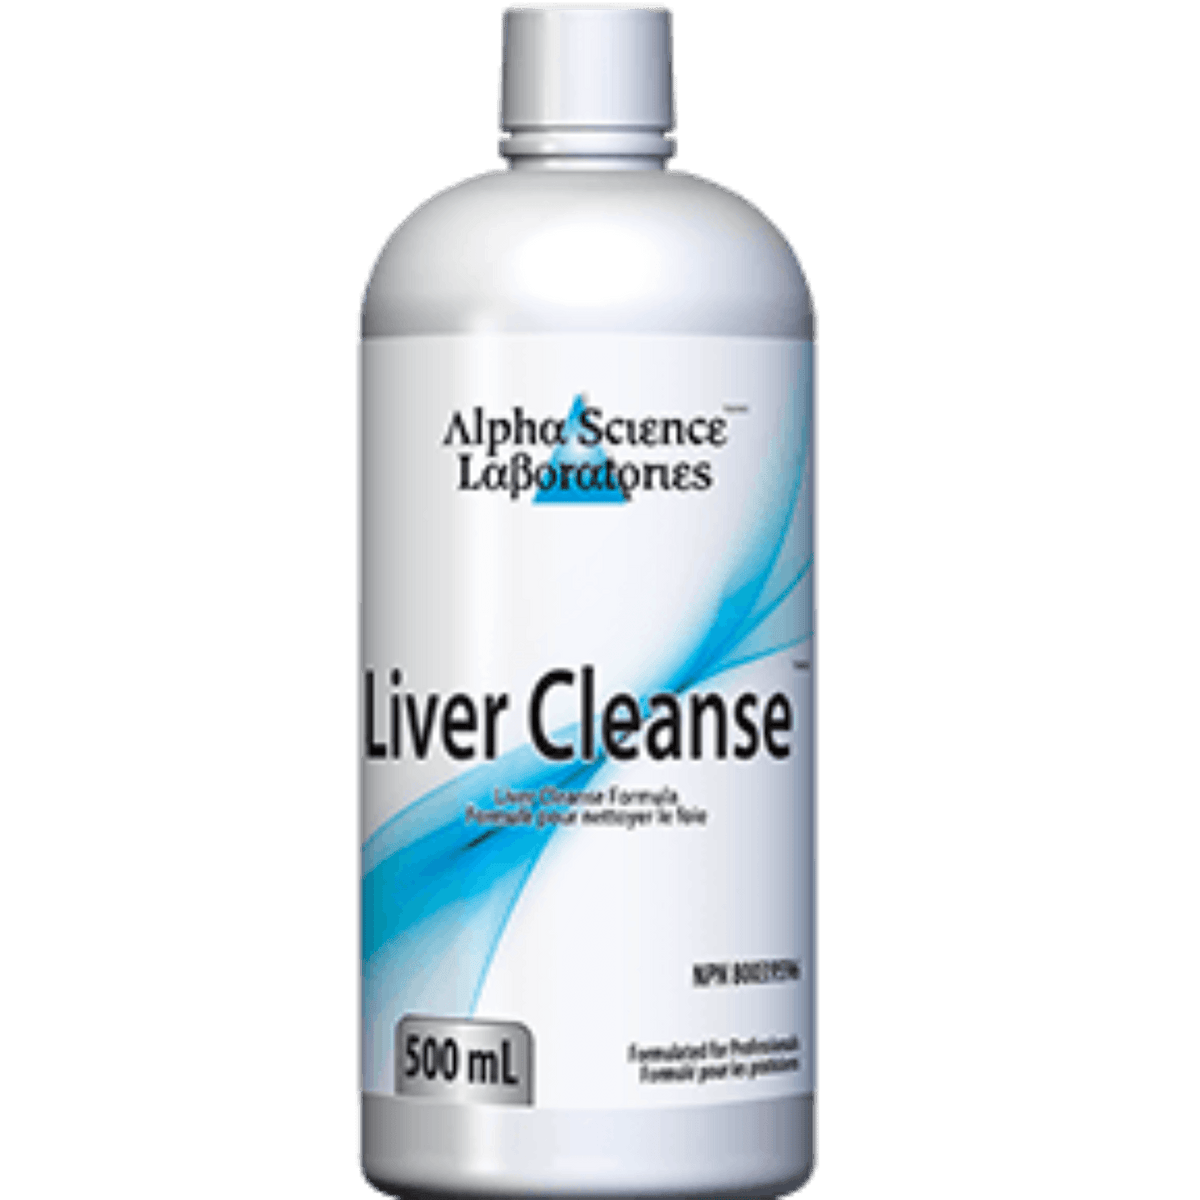 Alpha Science Liver Cleanse 500ml Supplements - Liver Care at Village Vitamin Store